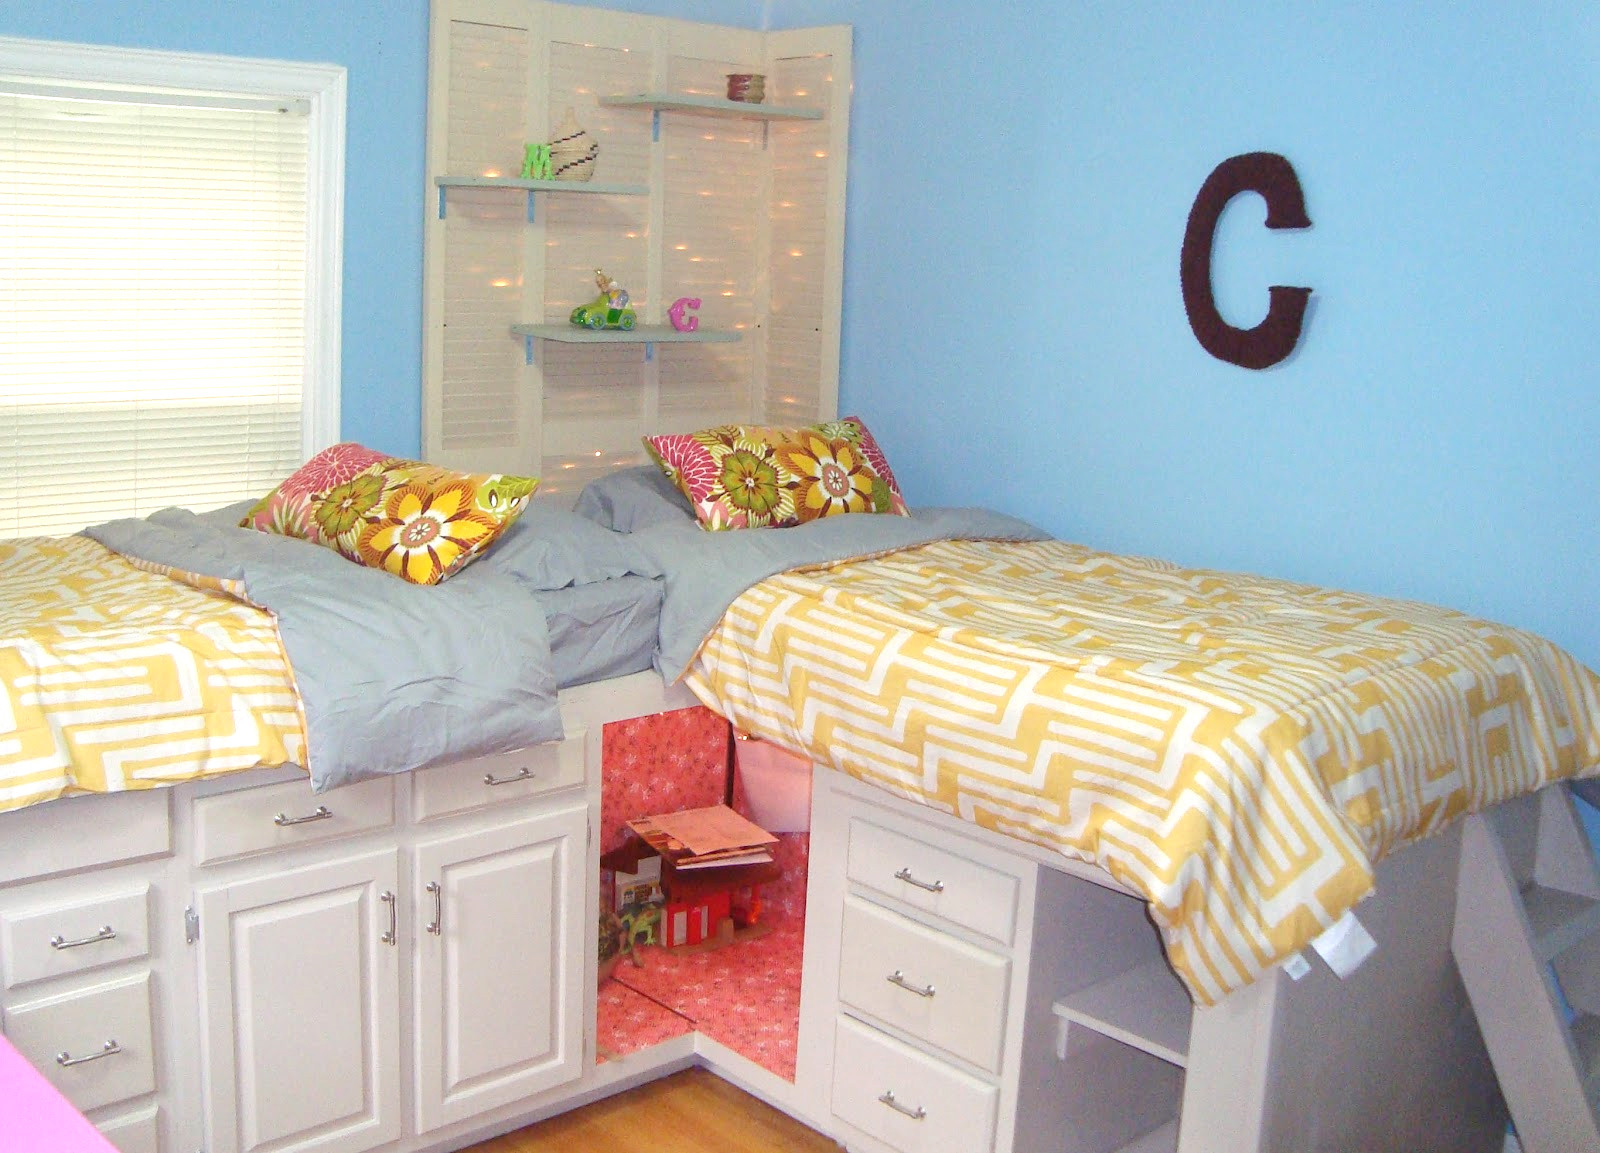 DIY Kids Bed With Storage
 8 DIY Storage Beds to Add Extra Space and Organization to